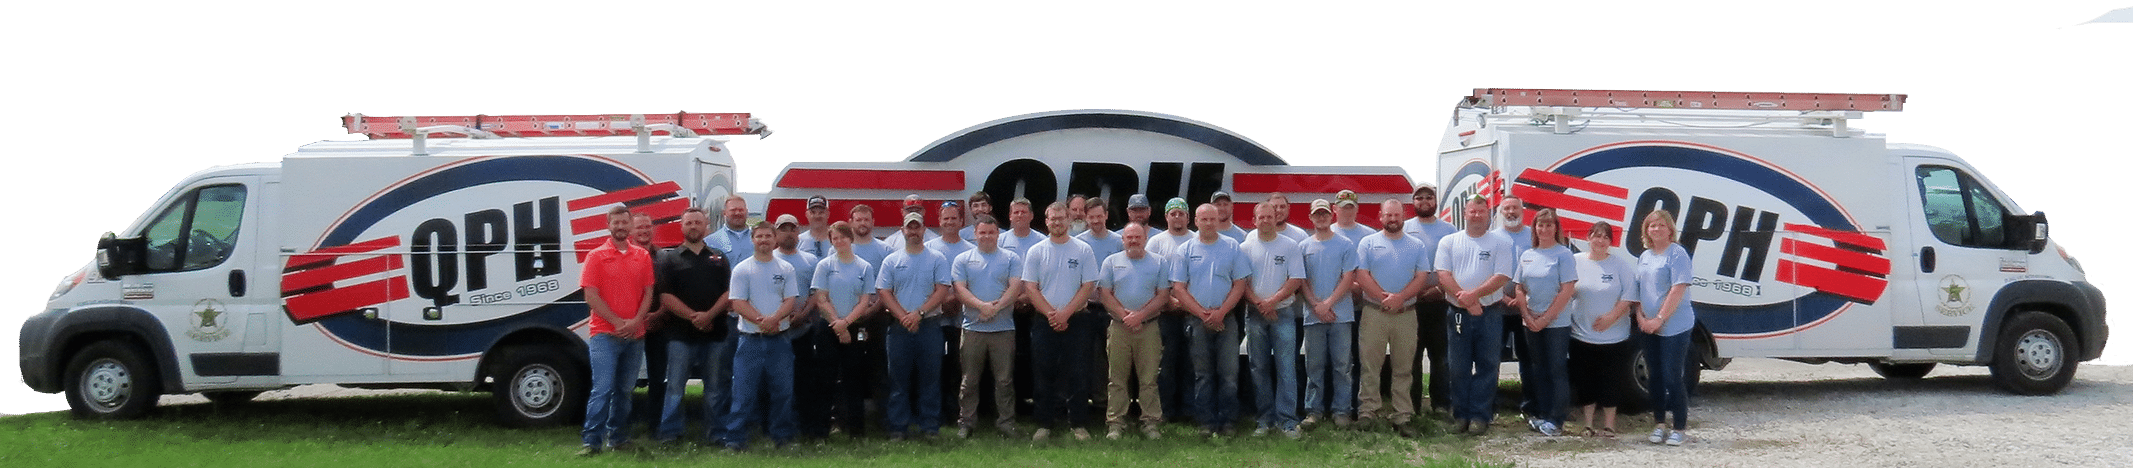 Professional HVAC Team in Marion Indiana